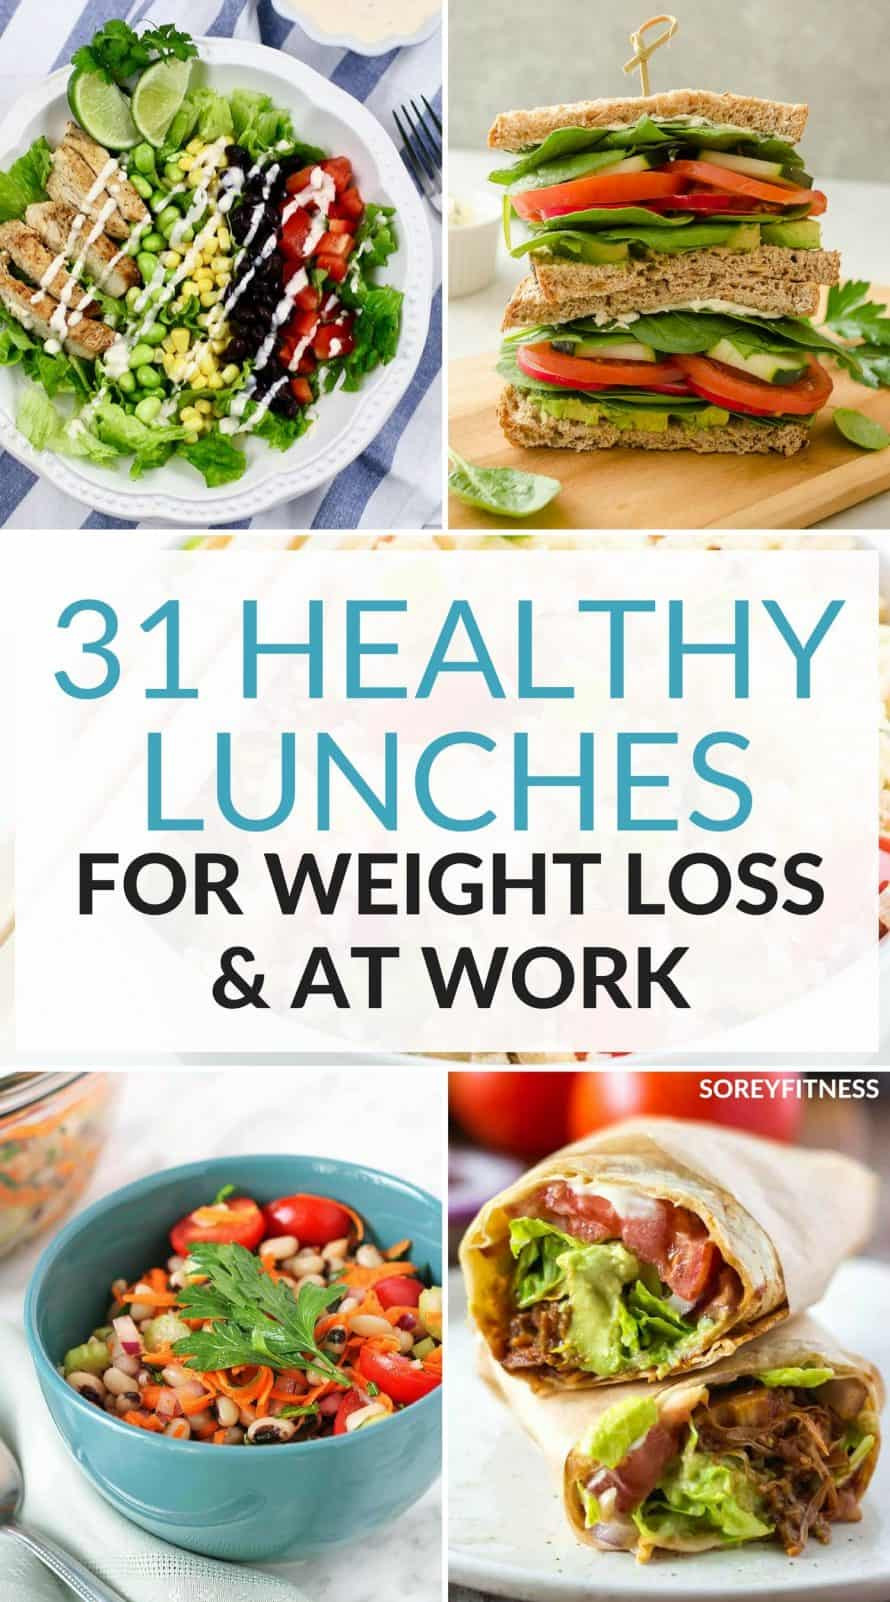 Heart Healthy Lunch Recipes
 31 Healthy Lunch Ideas For Weight Loss Easy Meals for